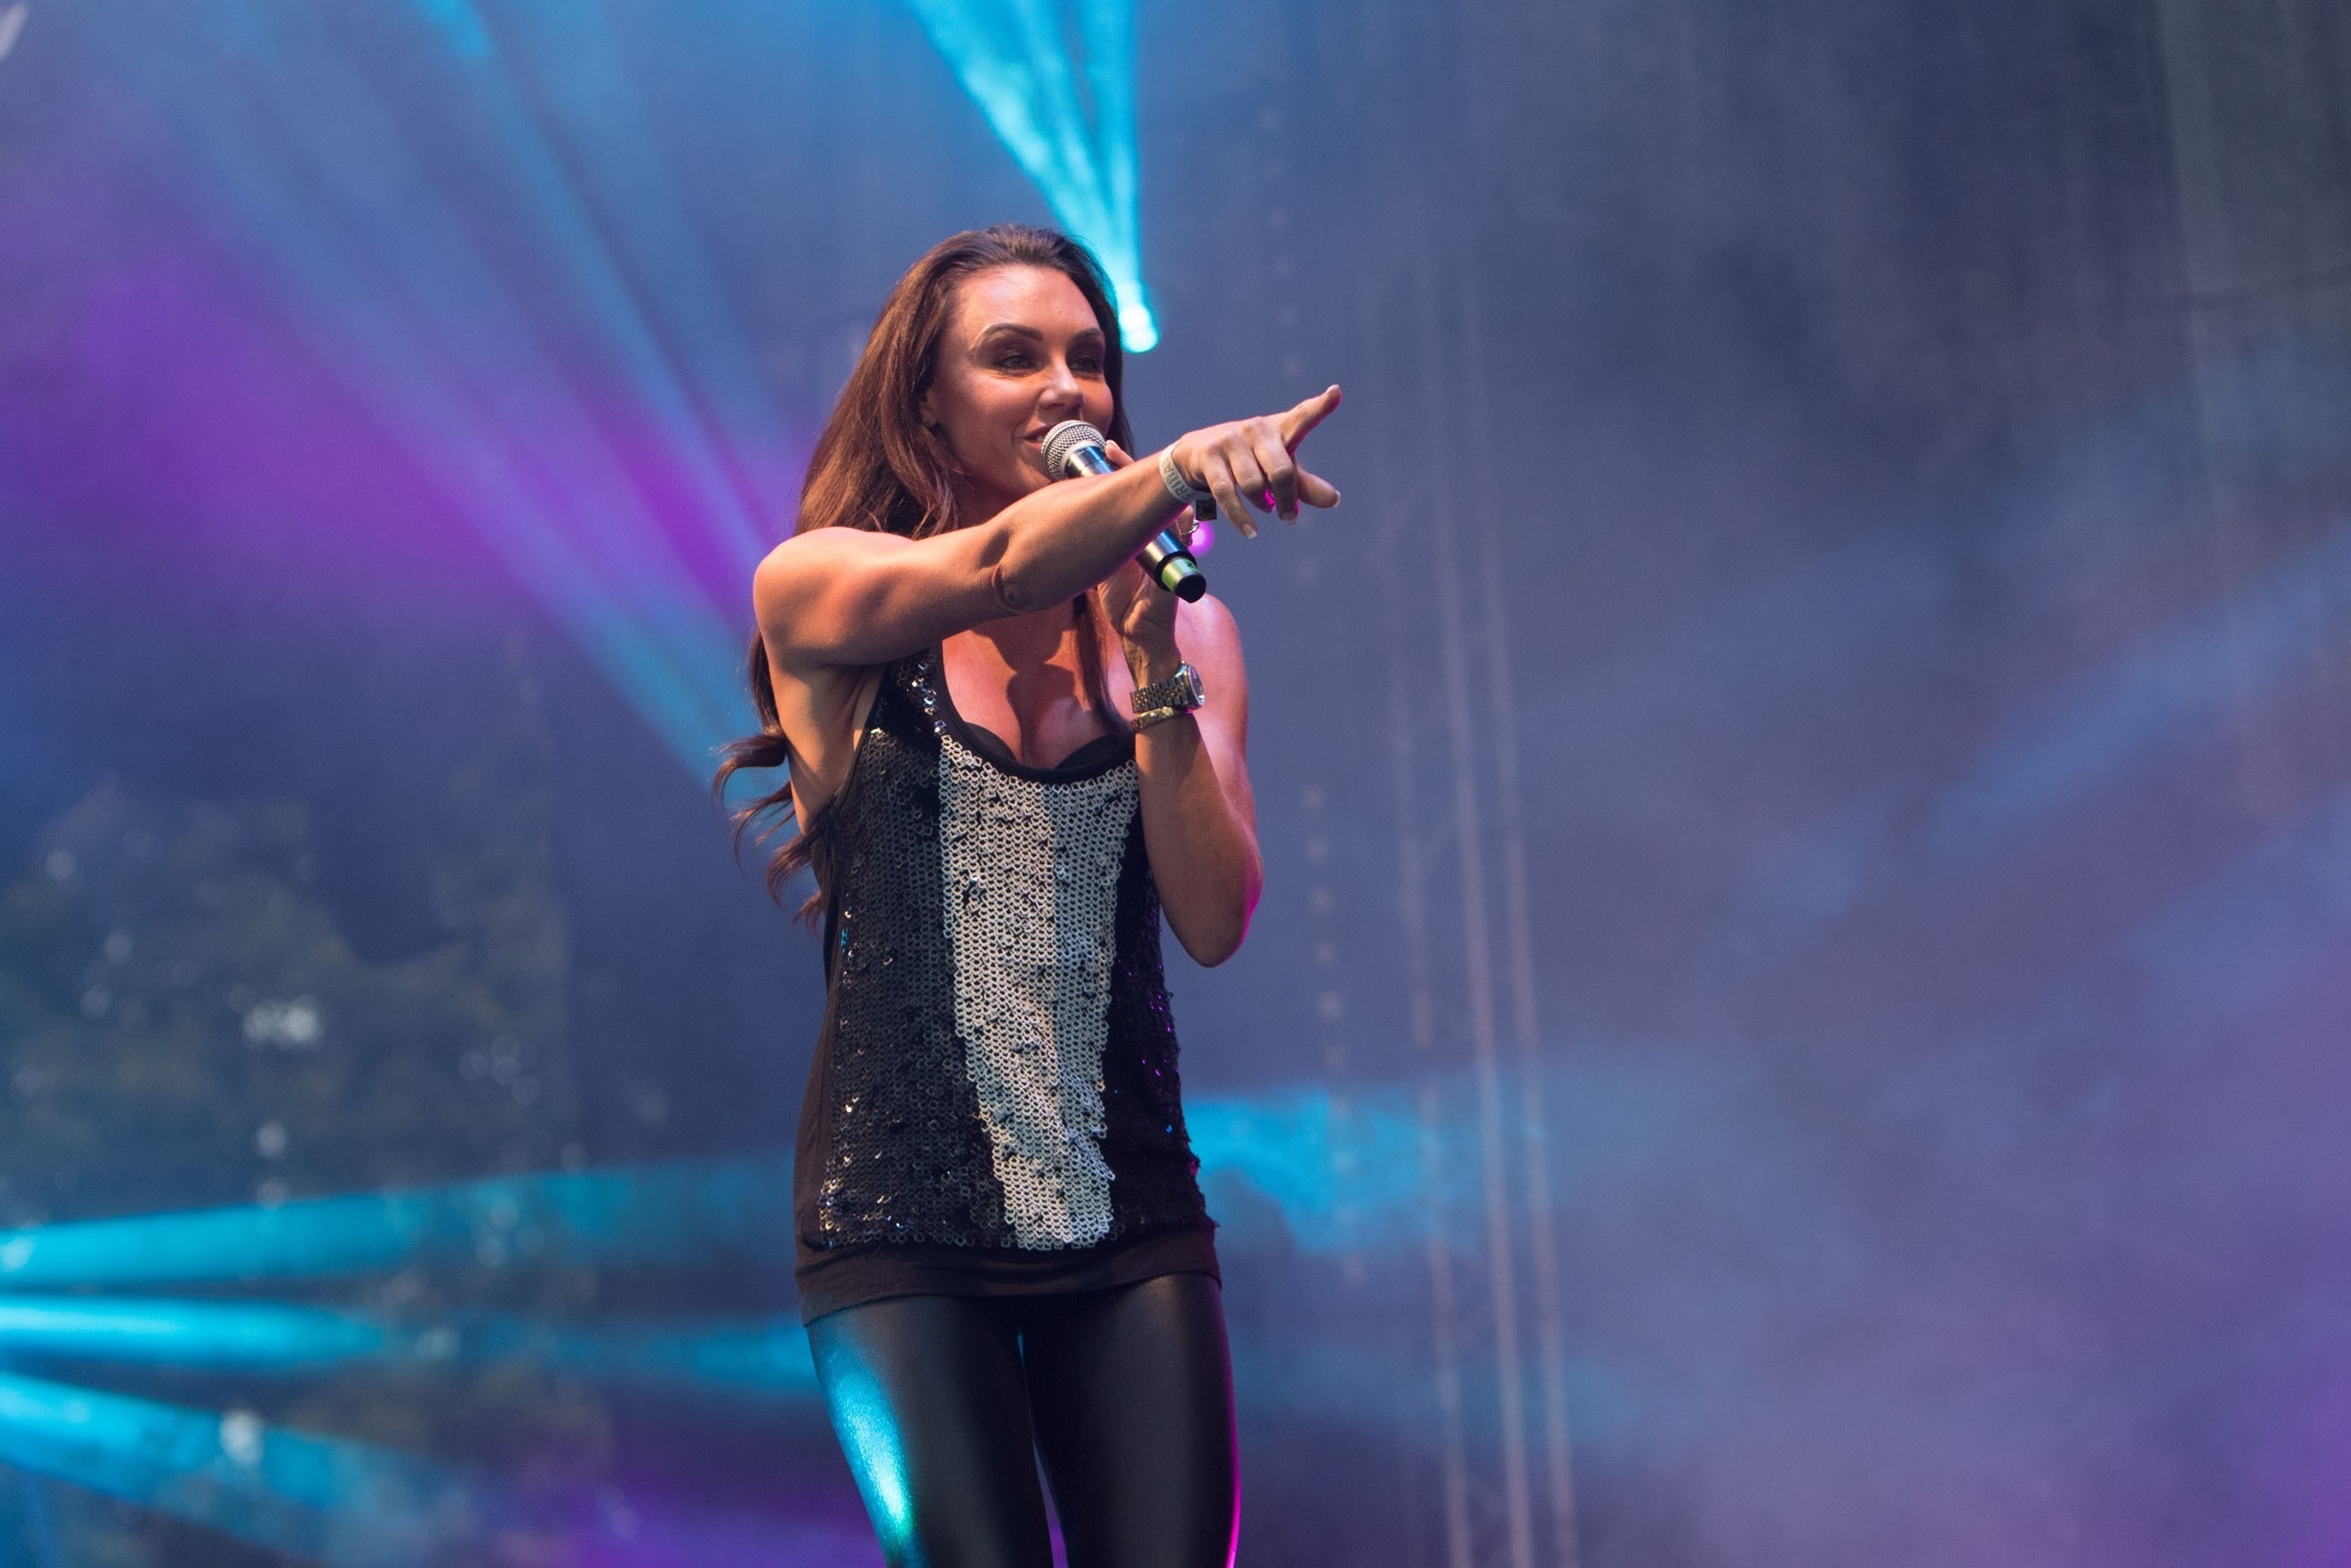 Michelle Heaton performs at the Big Day Out Festival